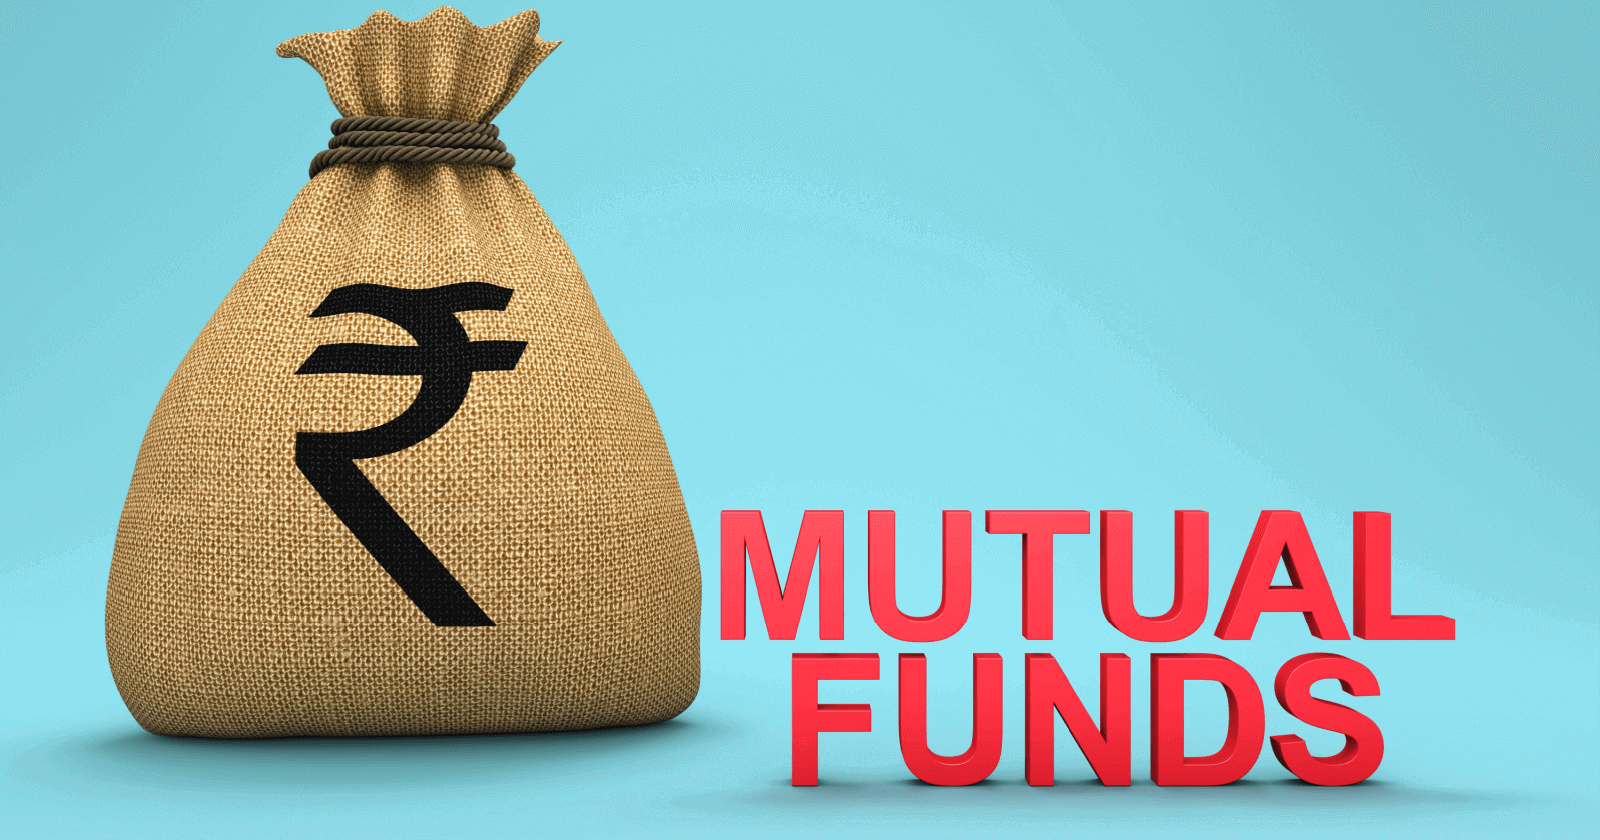 Overview of Mutual Funds in India